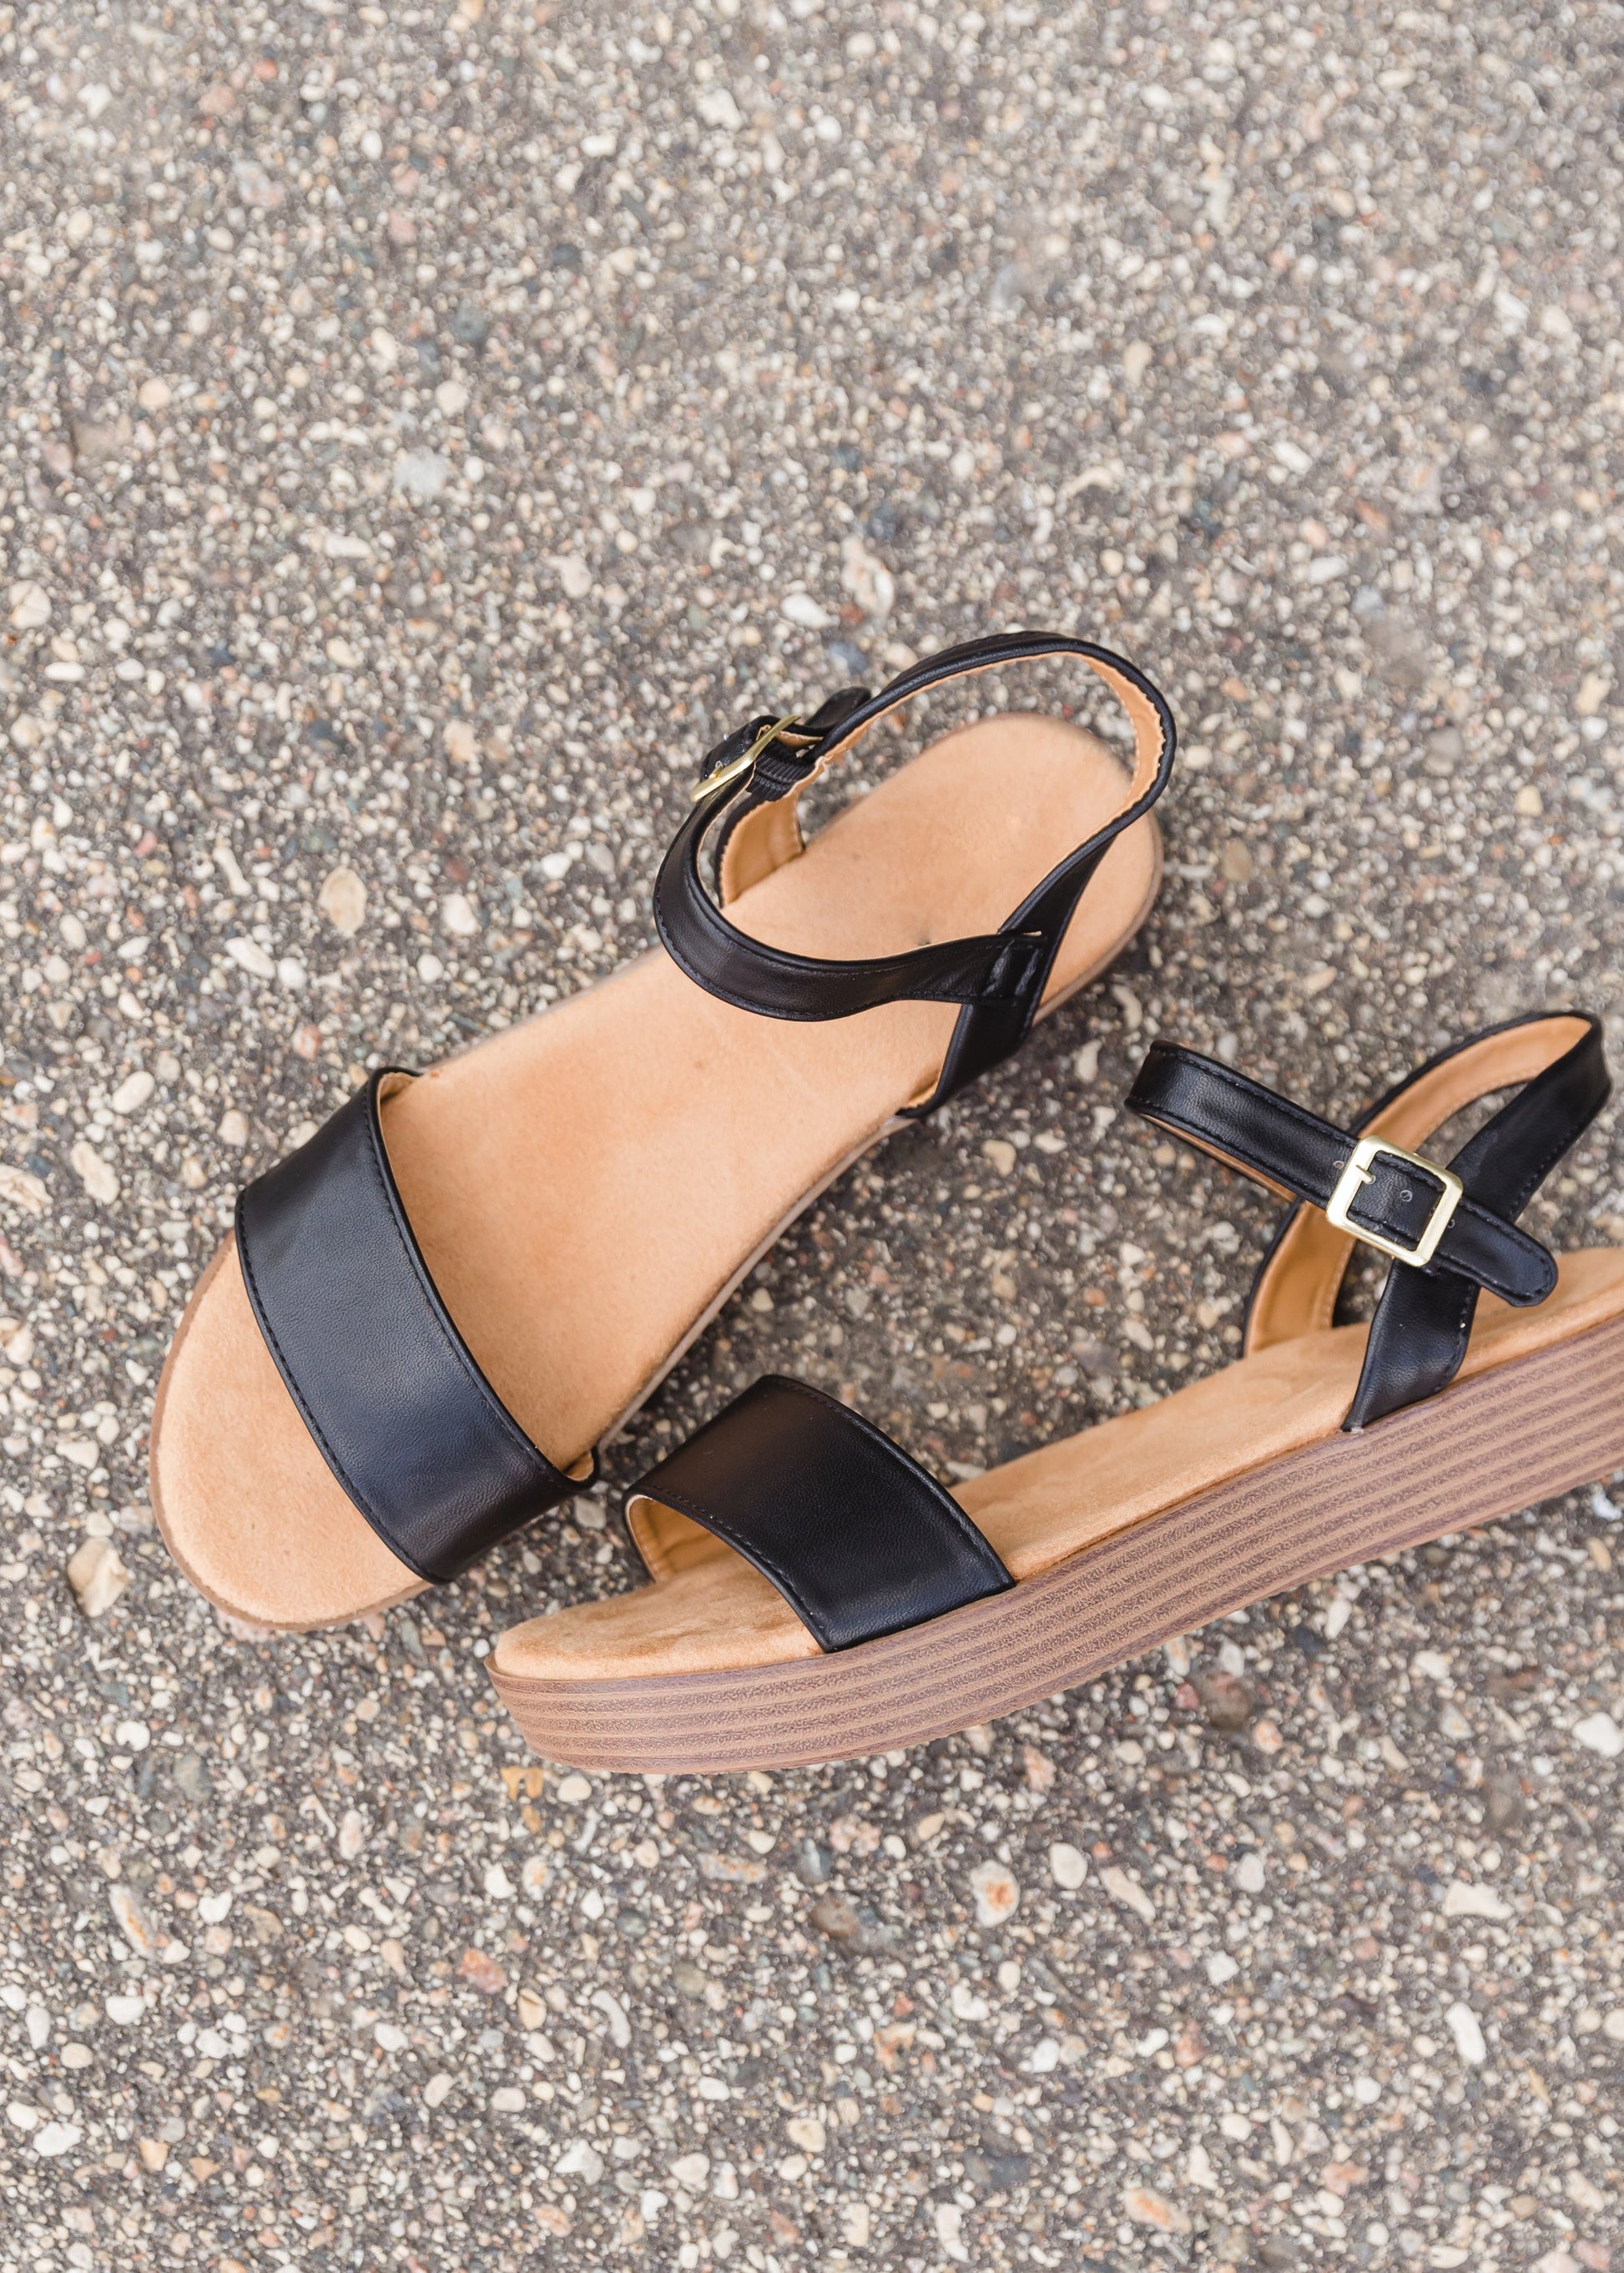 Black Ankle Strap Wedge - FINAL SALE Shoes